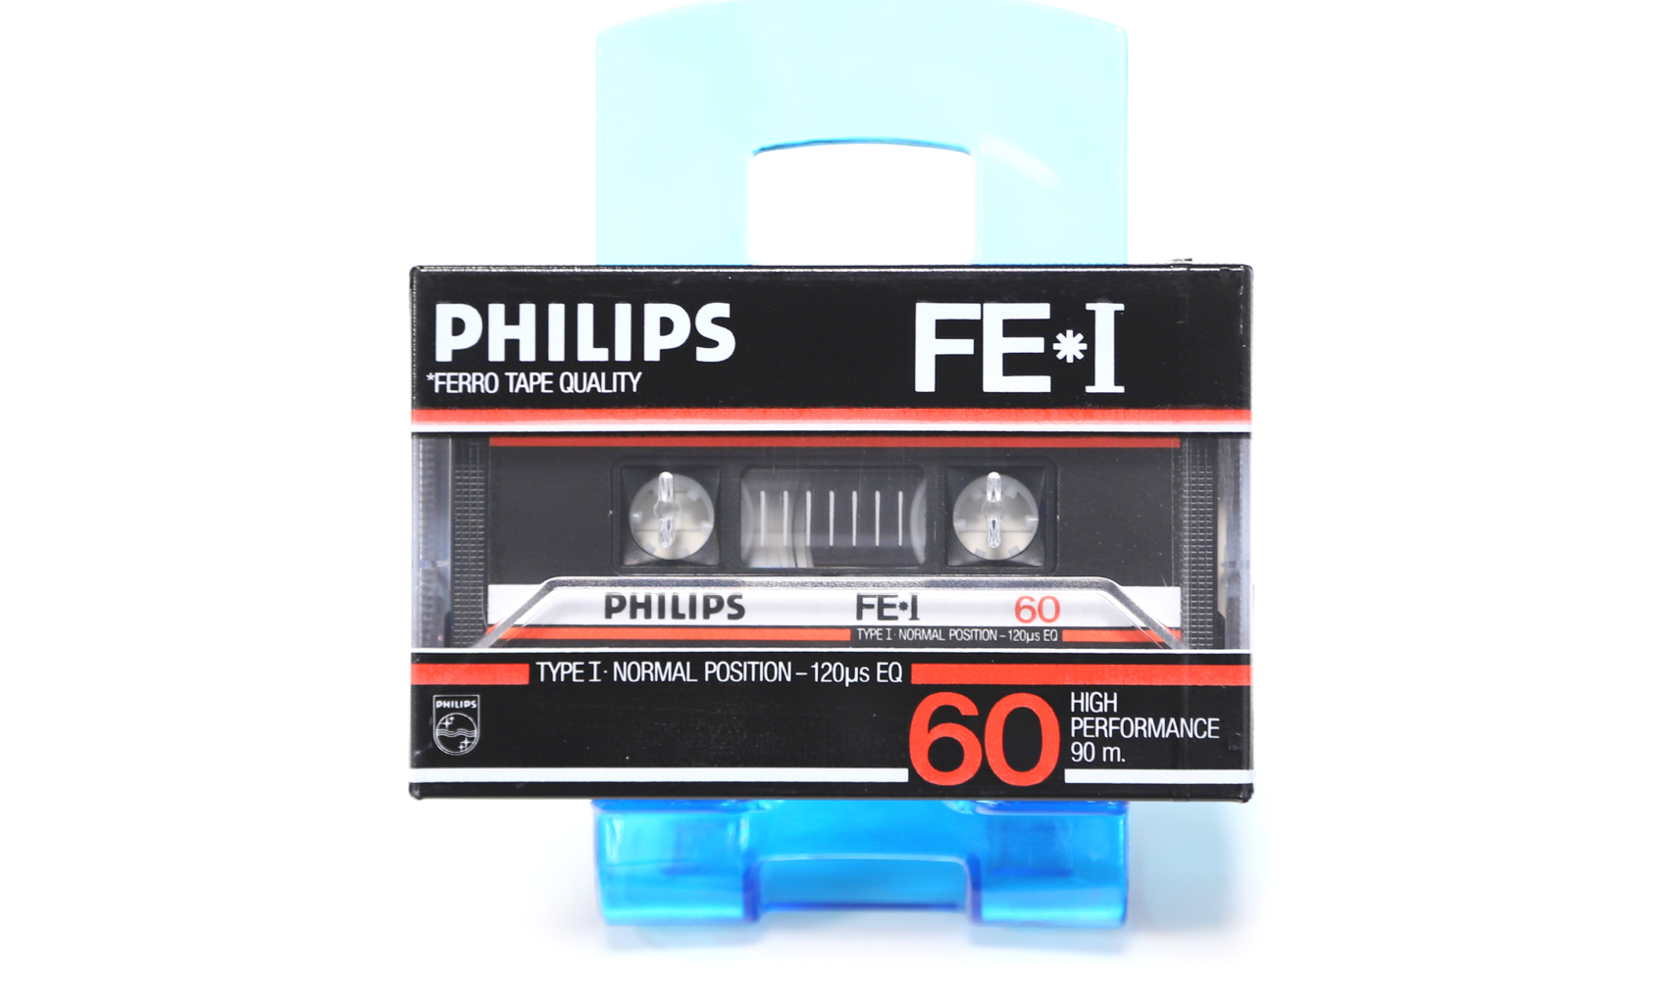 PHILIPS FE-I60 Position Normal